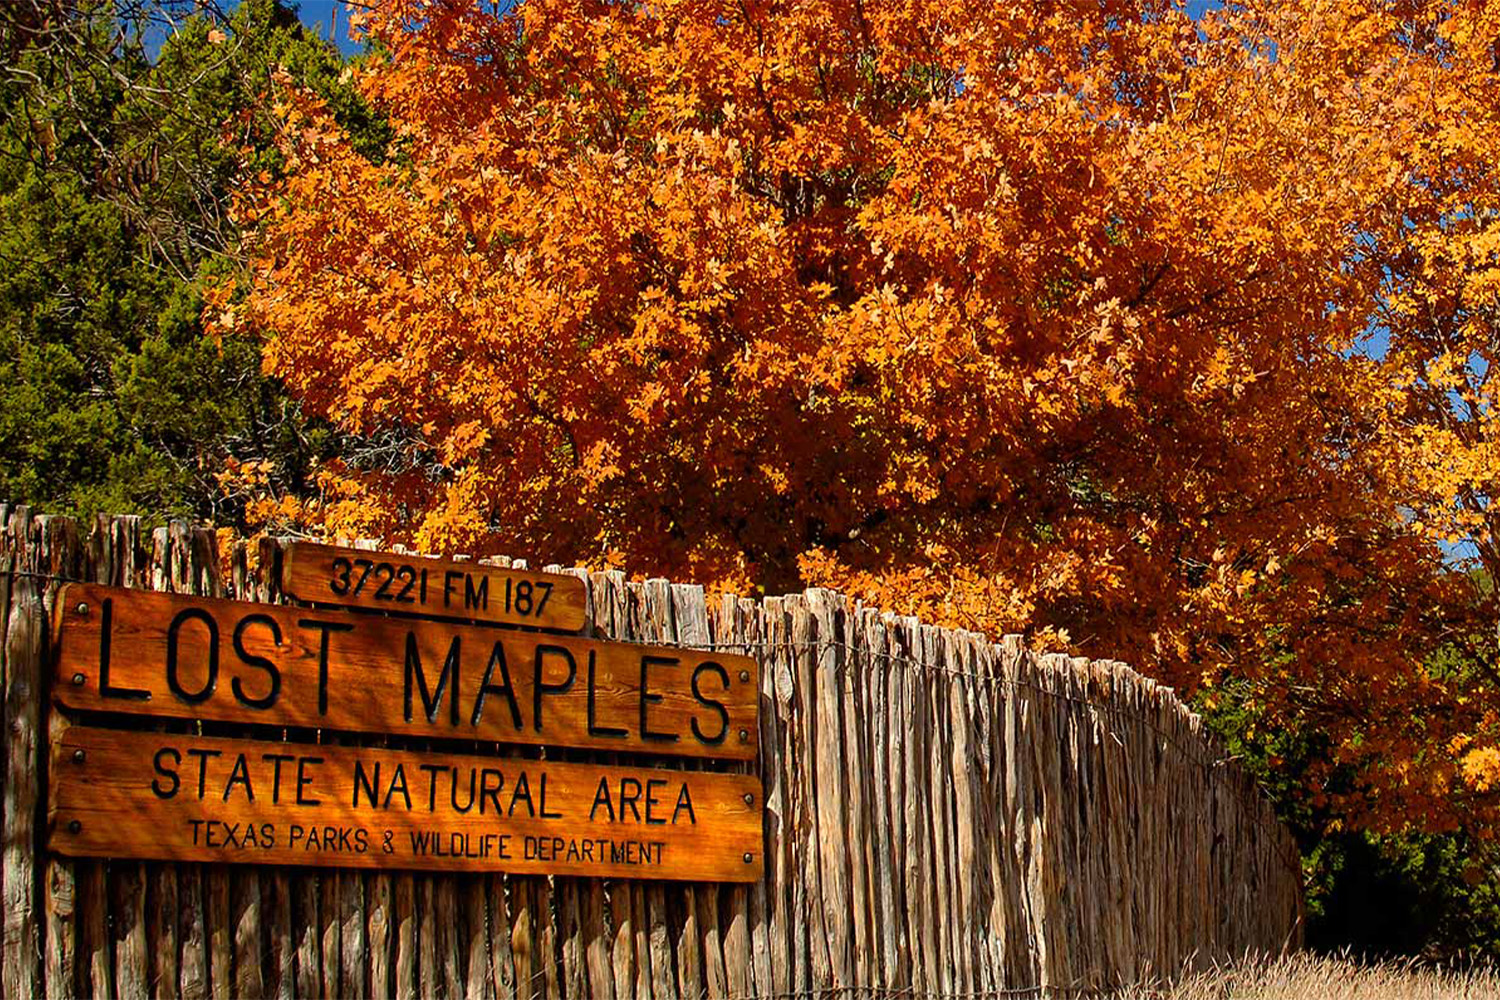 Orange leaves on trees in front of Lost Maple sign